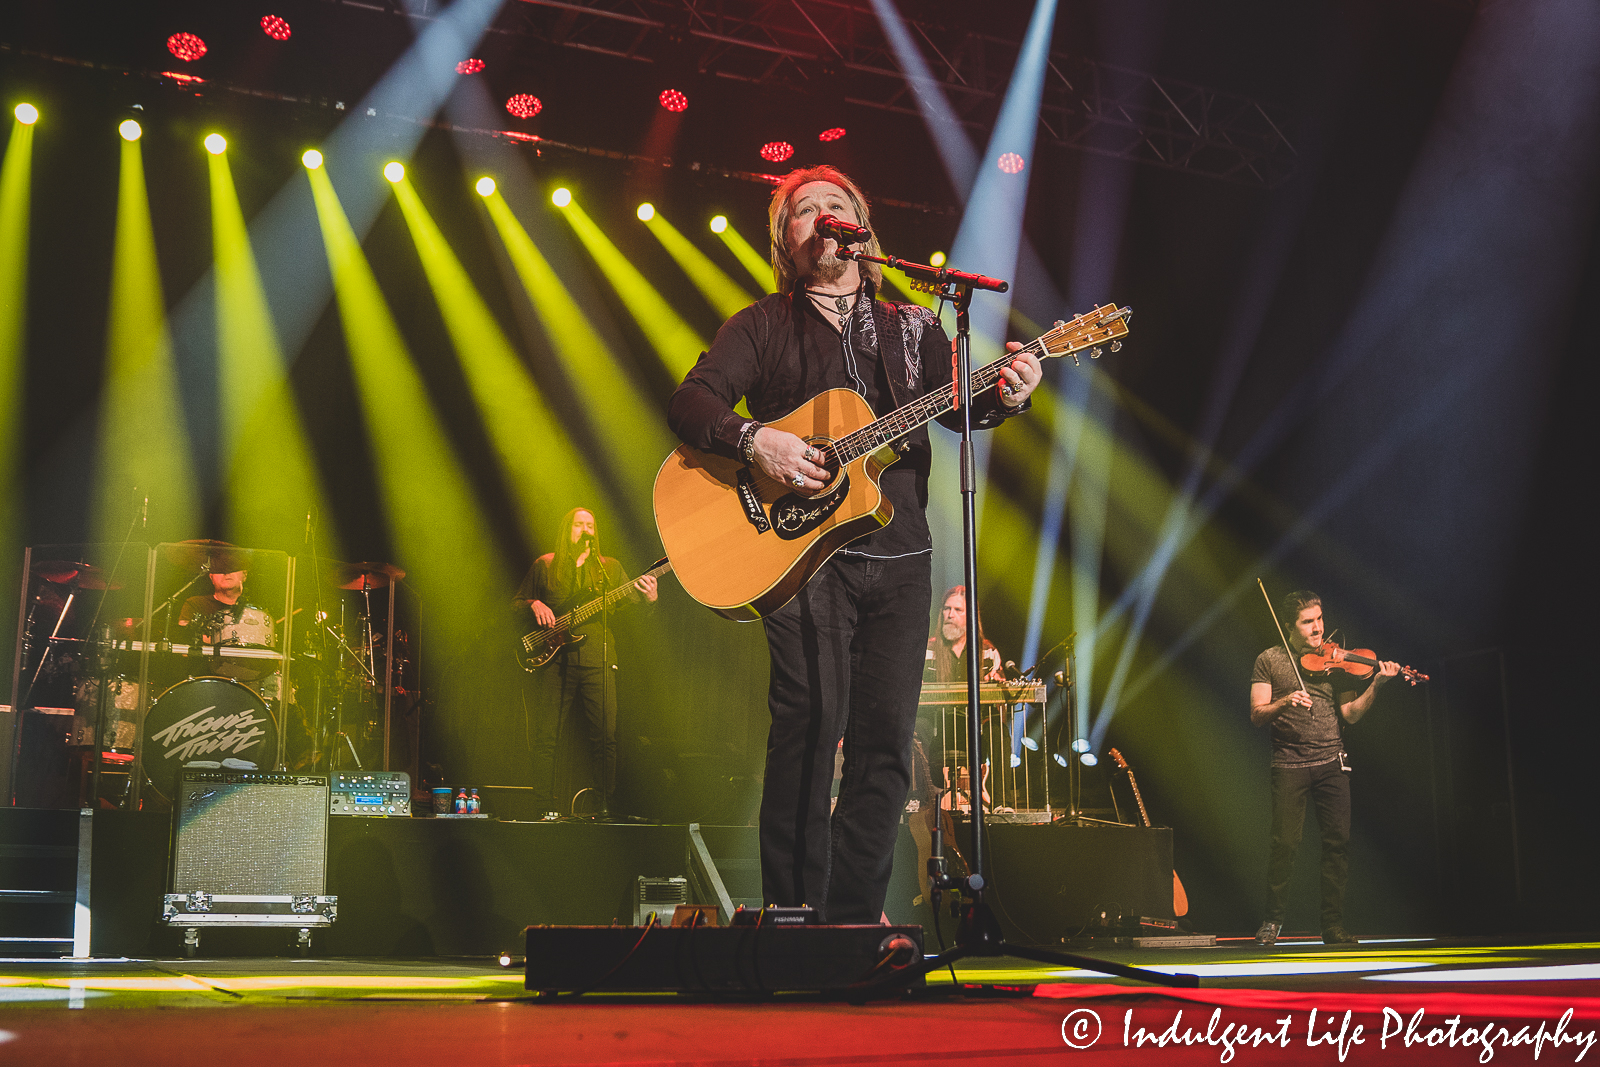 Travis Tritt and his band performing "The Whiskey Ain't Workin'" live at Ameristar Casino Hotel Kansas City on December 10, 2022.